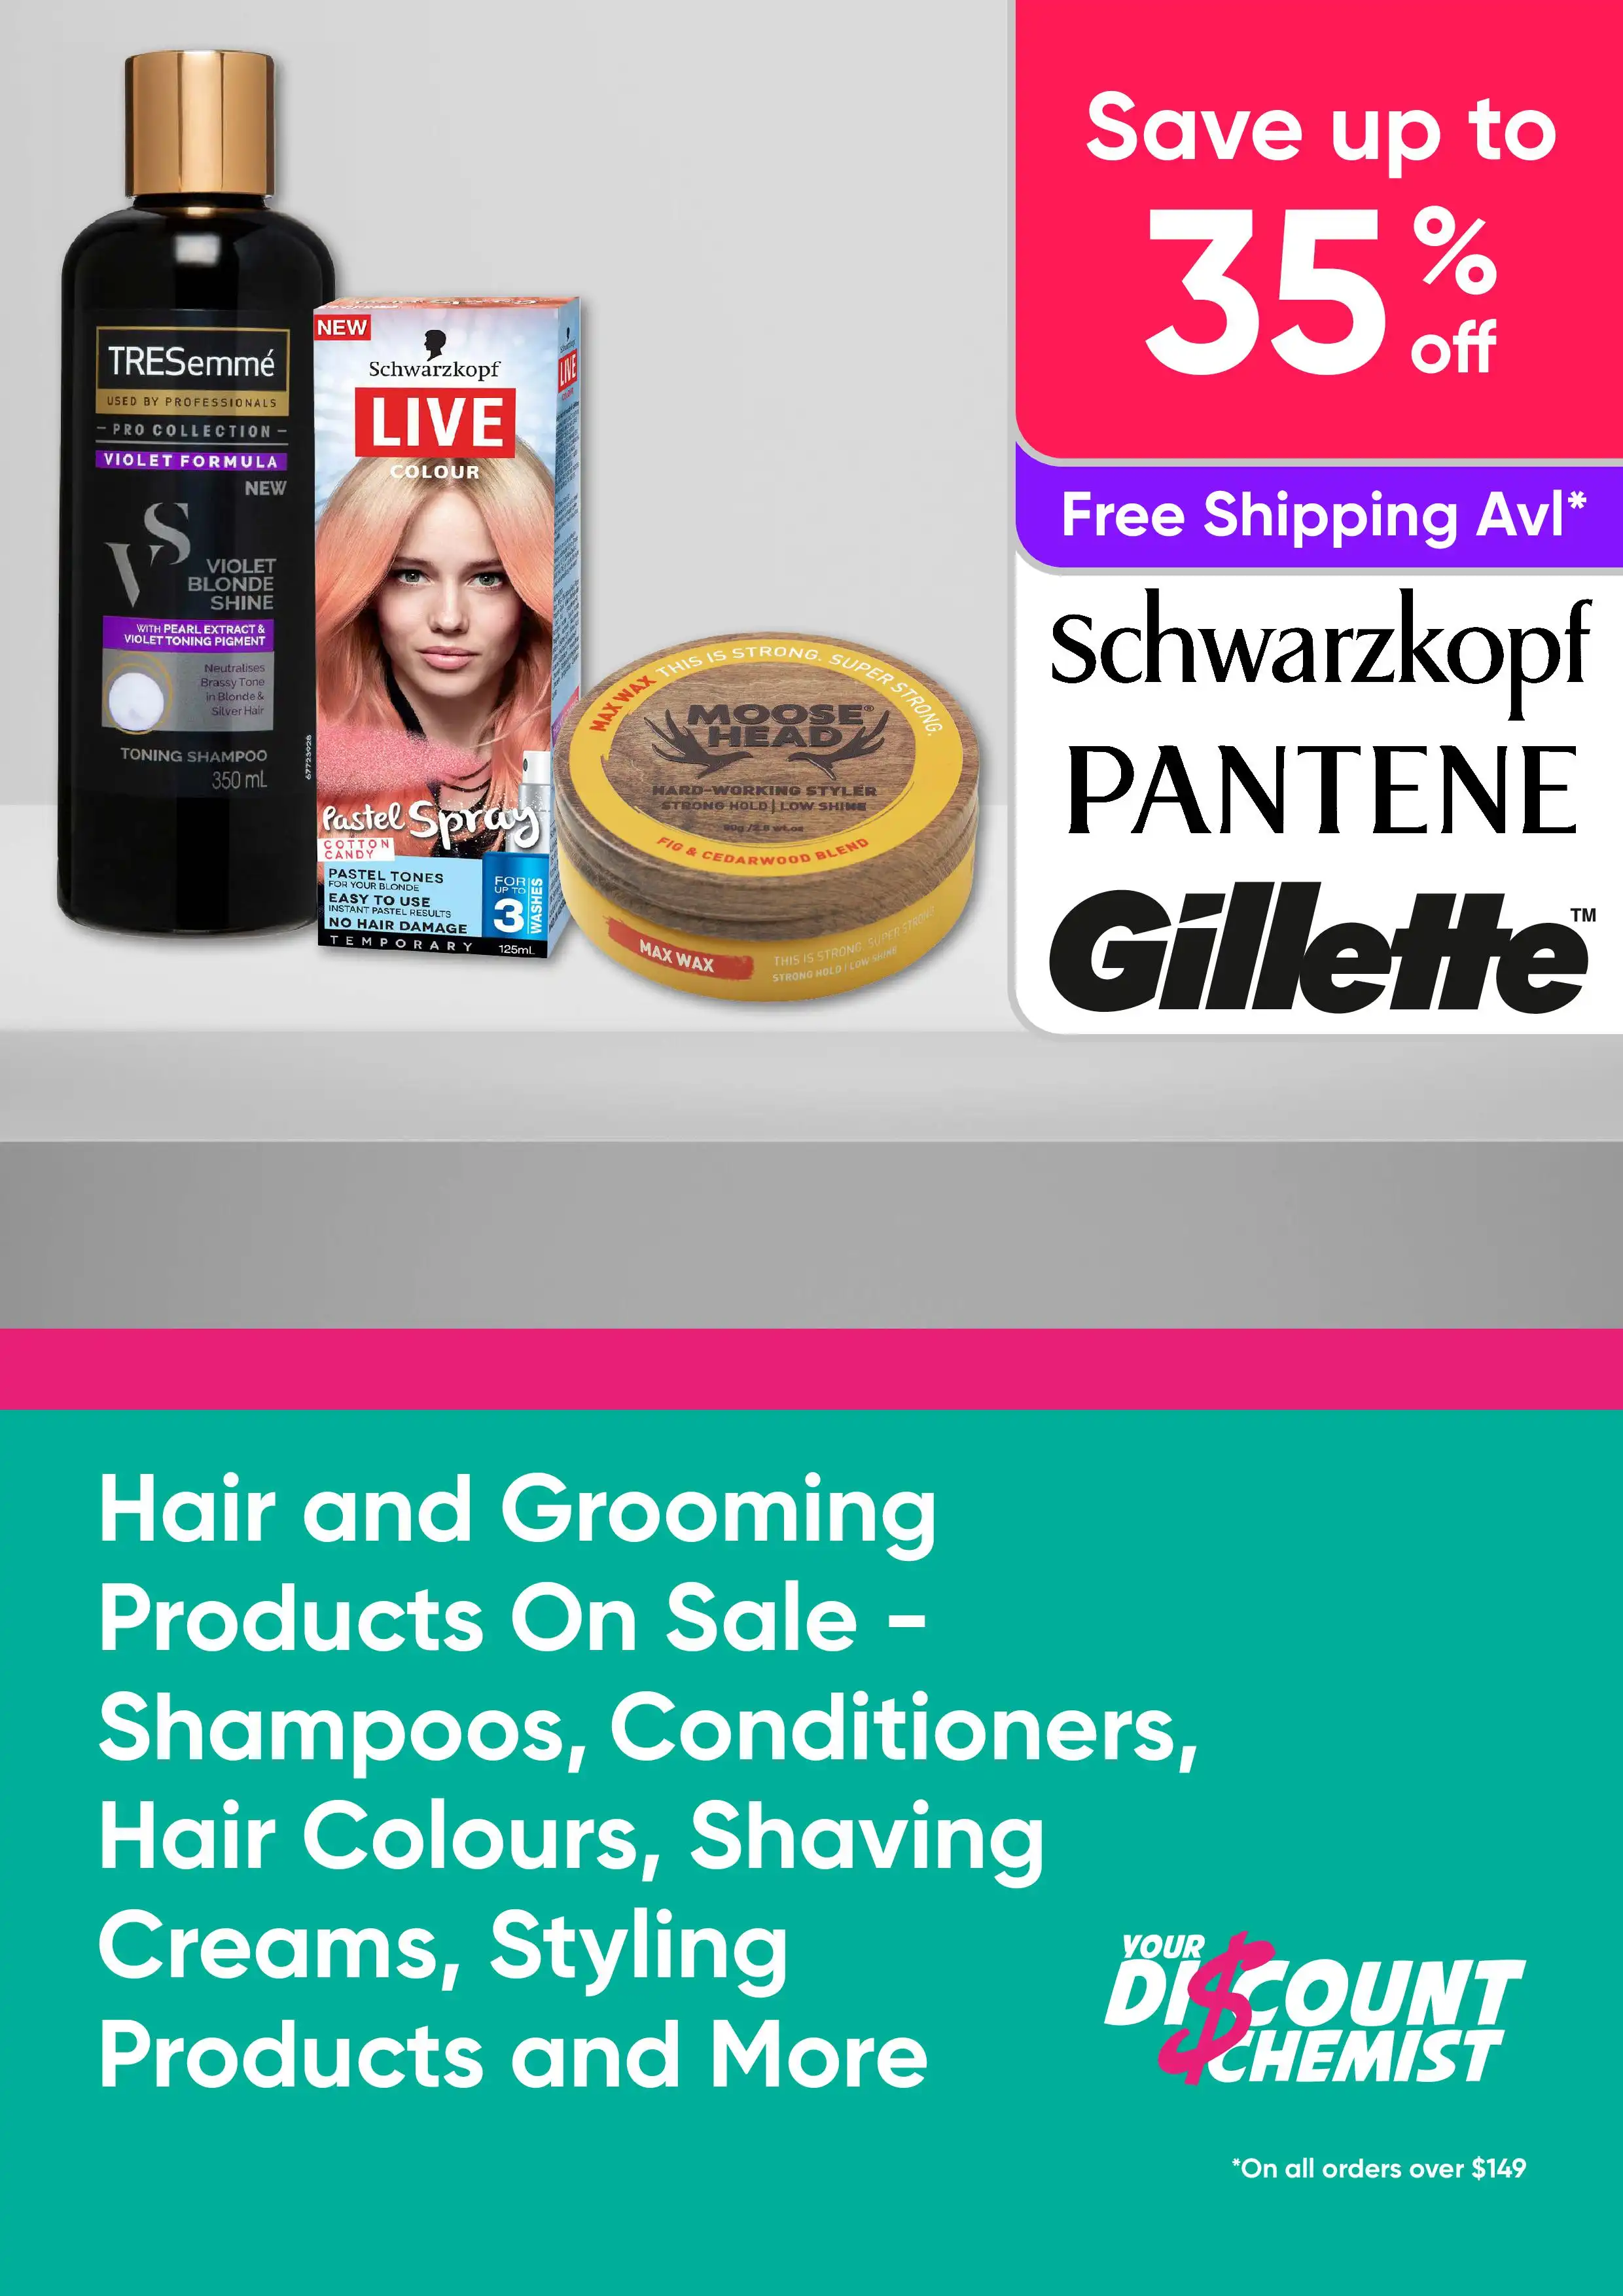 Hair and Grooming Products On Sale - Save Up to 35% Off Shampoos, Hair Colours and More